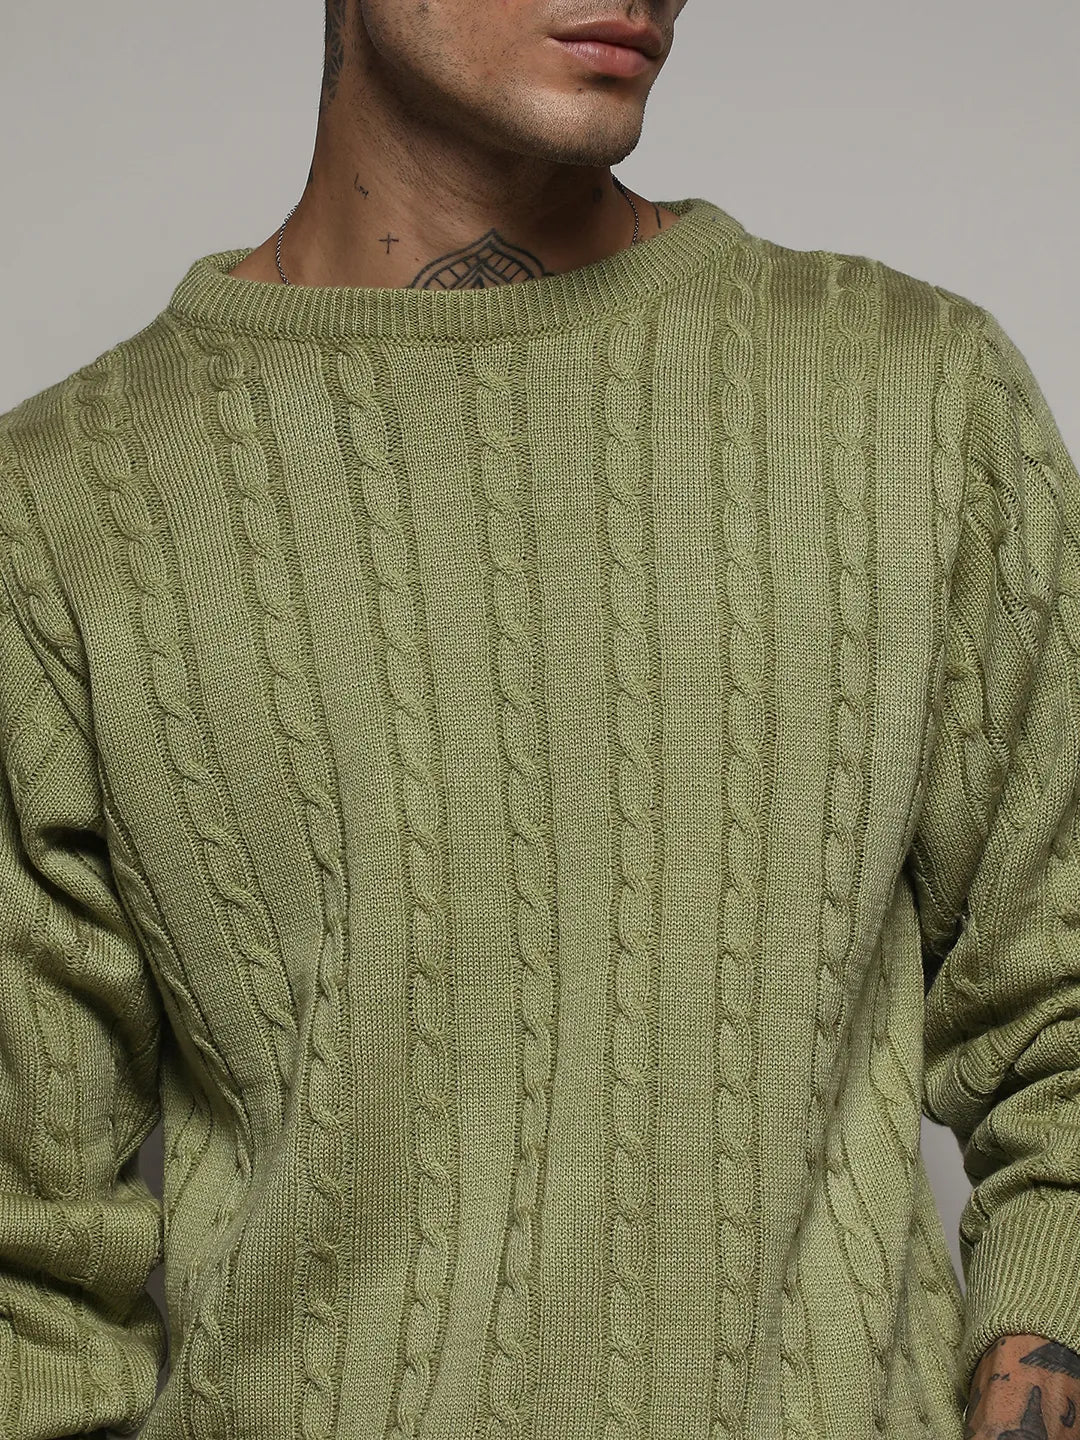 Olive Green Cable Knit Sweater